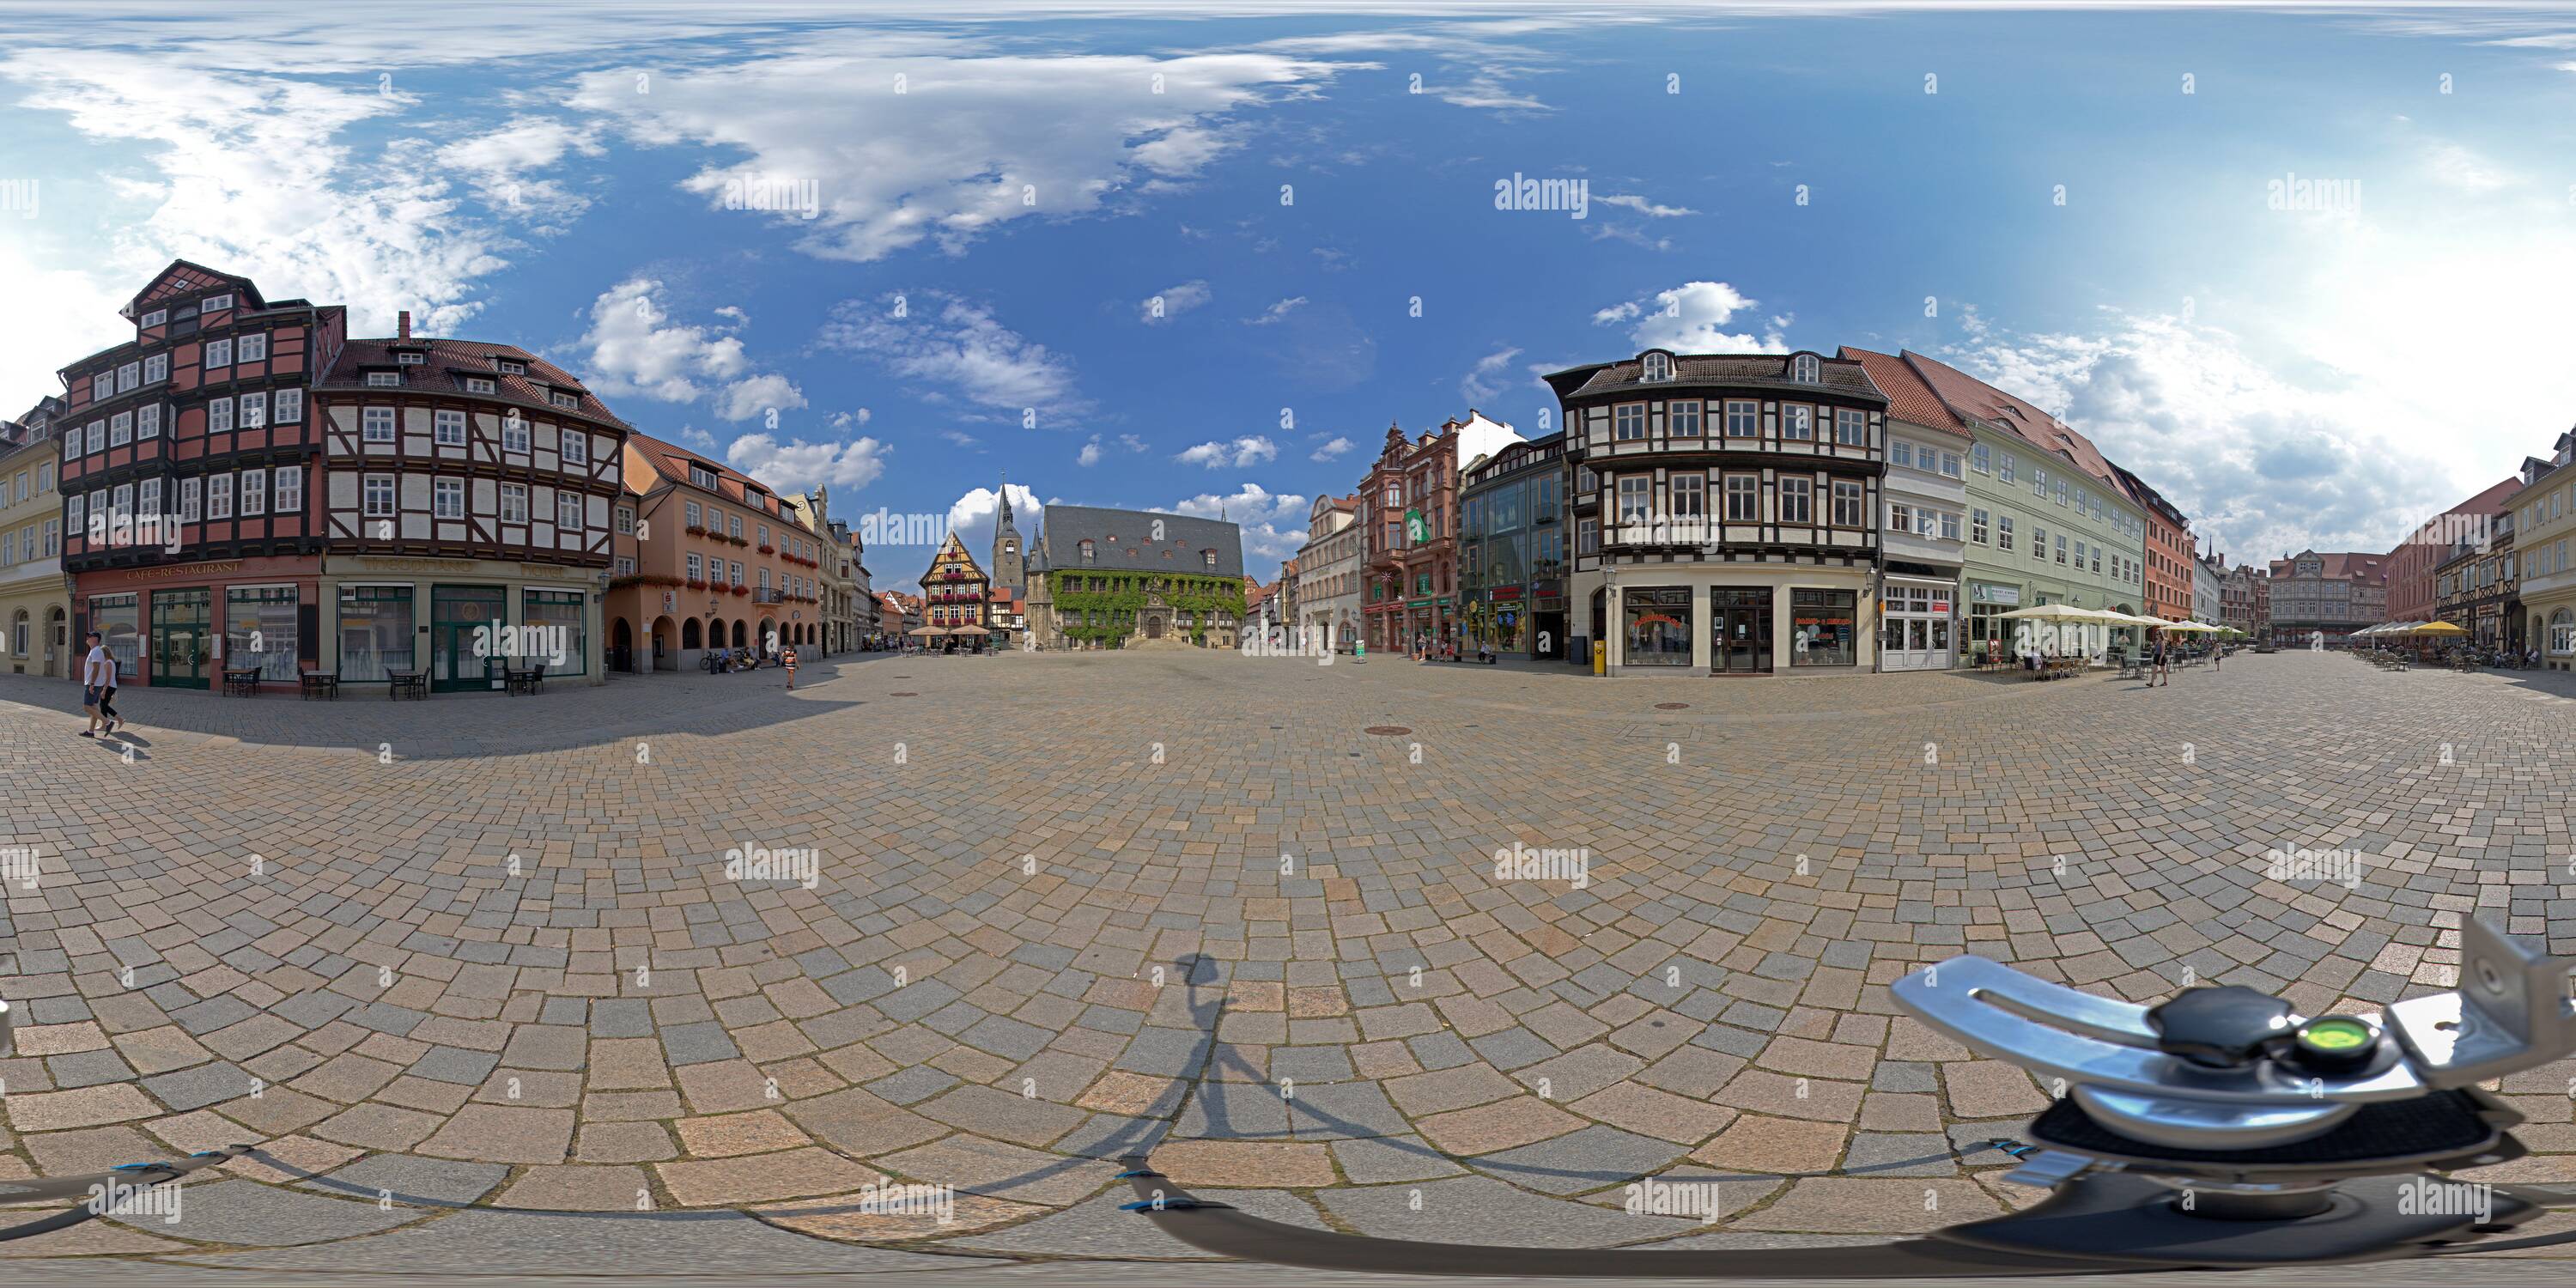 360 degree panoramic view of 360 degree photo, market square, UNESCO world cultural heritage, Quedlinburg, Saxony-Anhalt, Germany